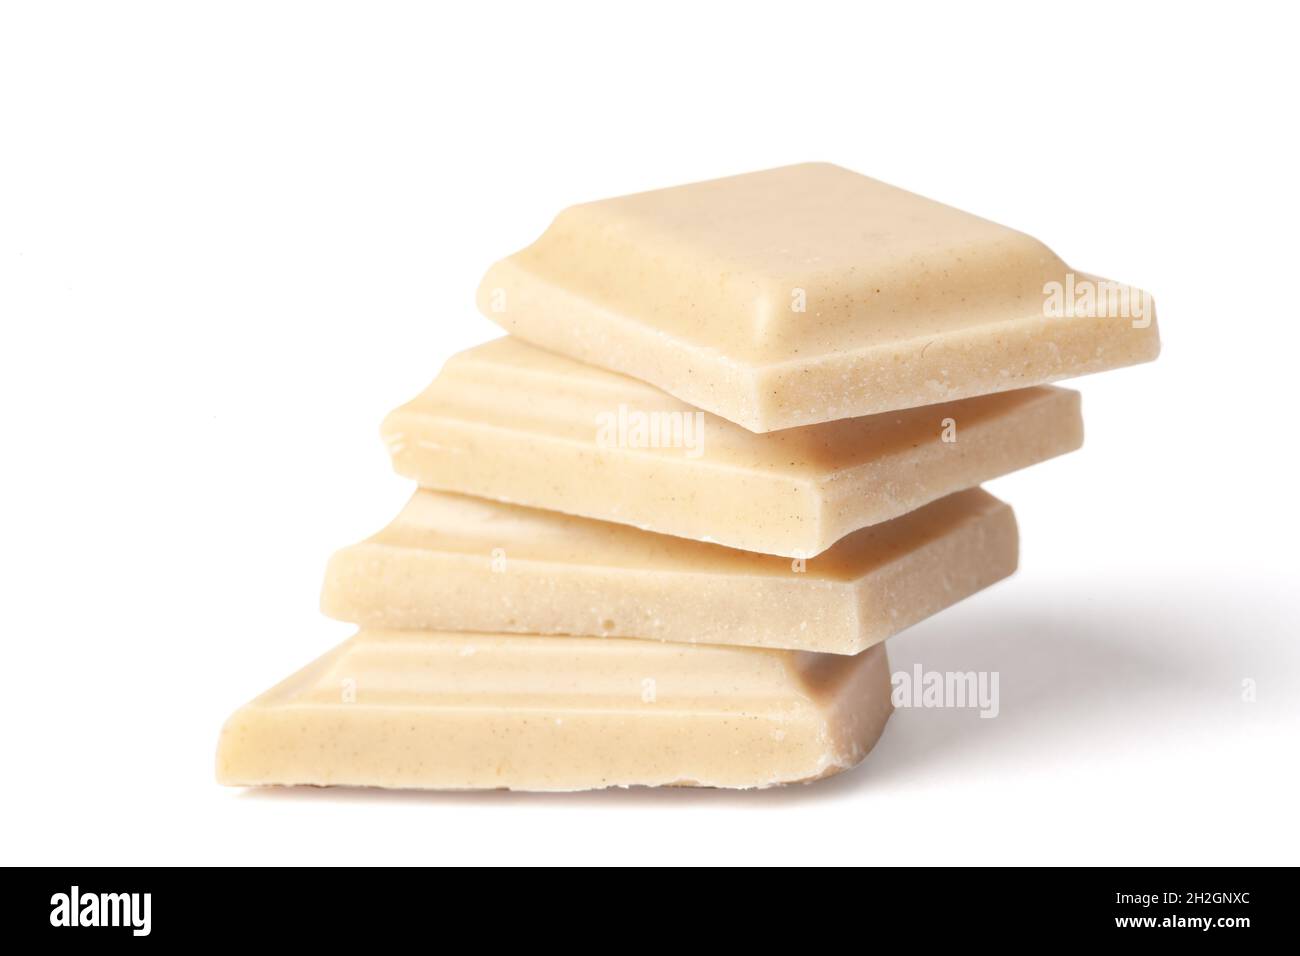 Three pieces white chocolate arranged in a pile isolated on white background Stock Photo